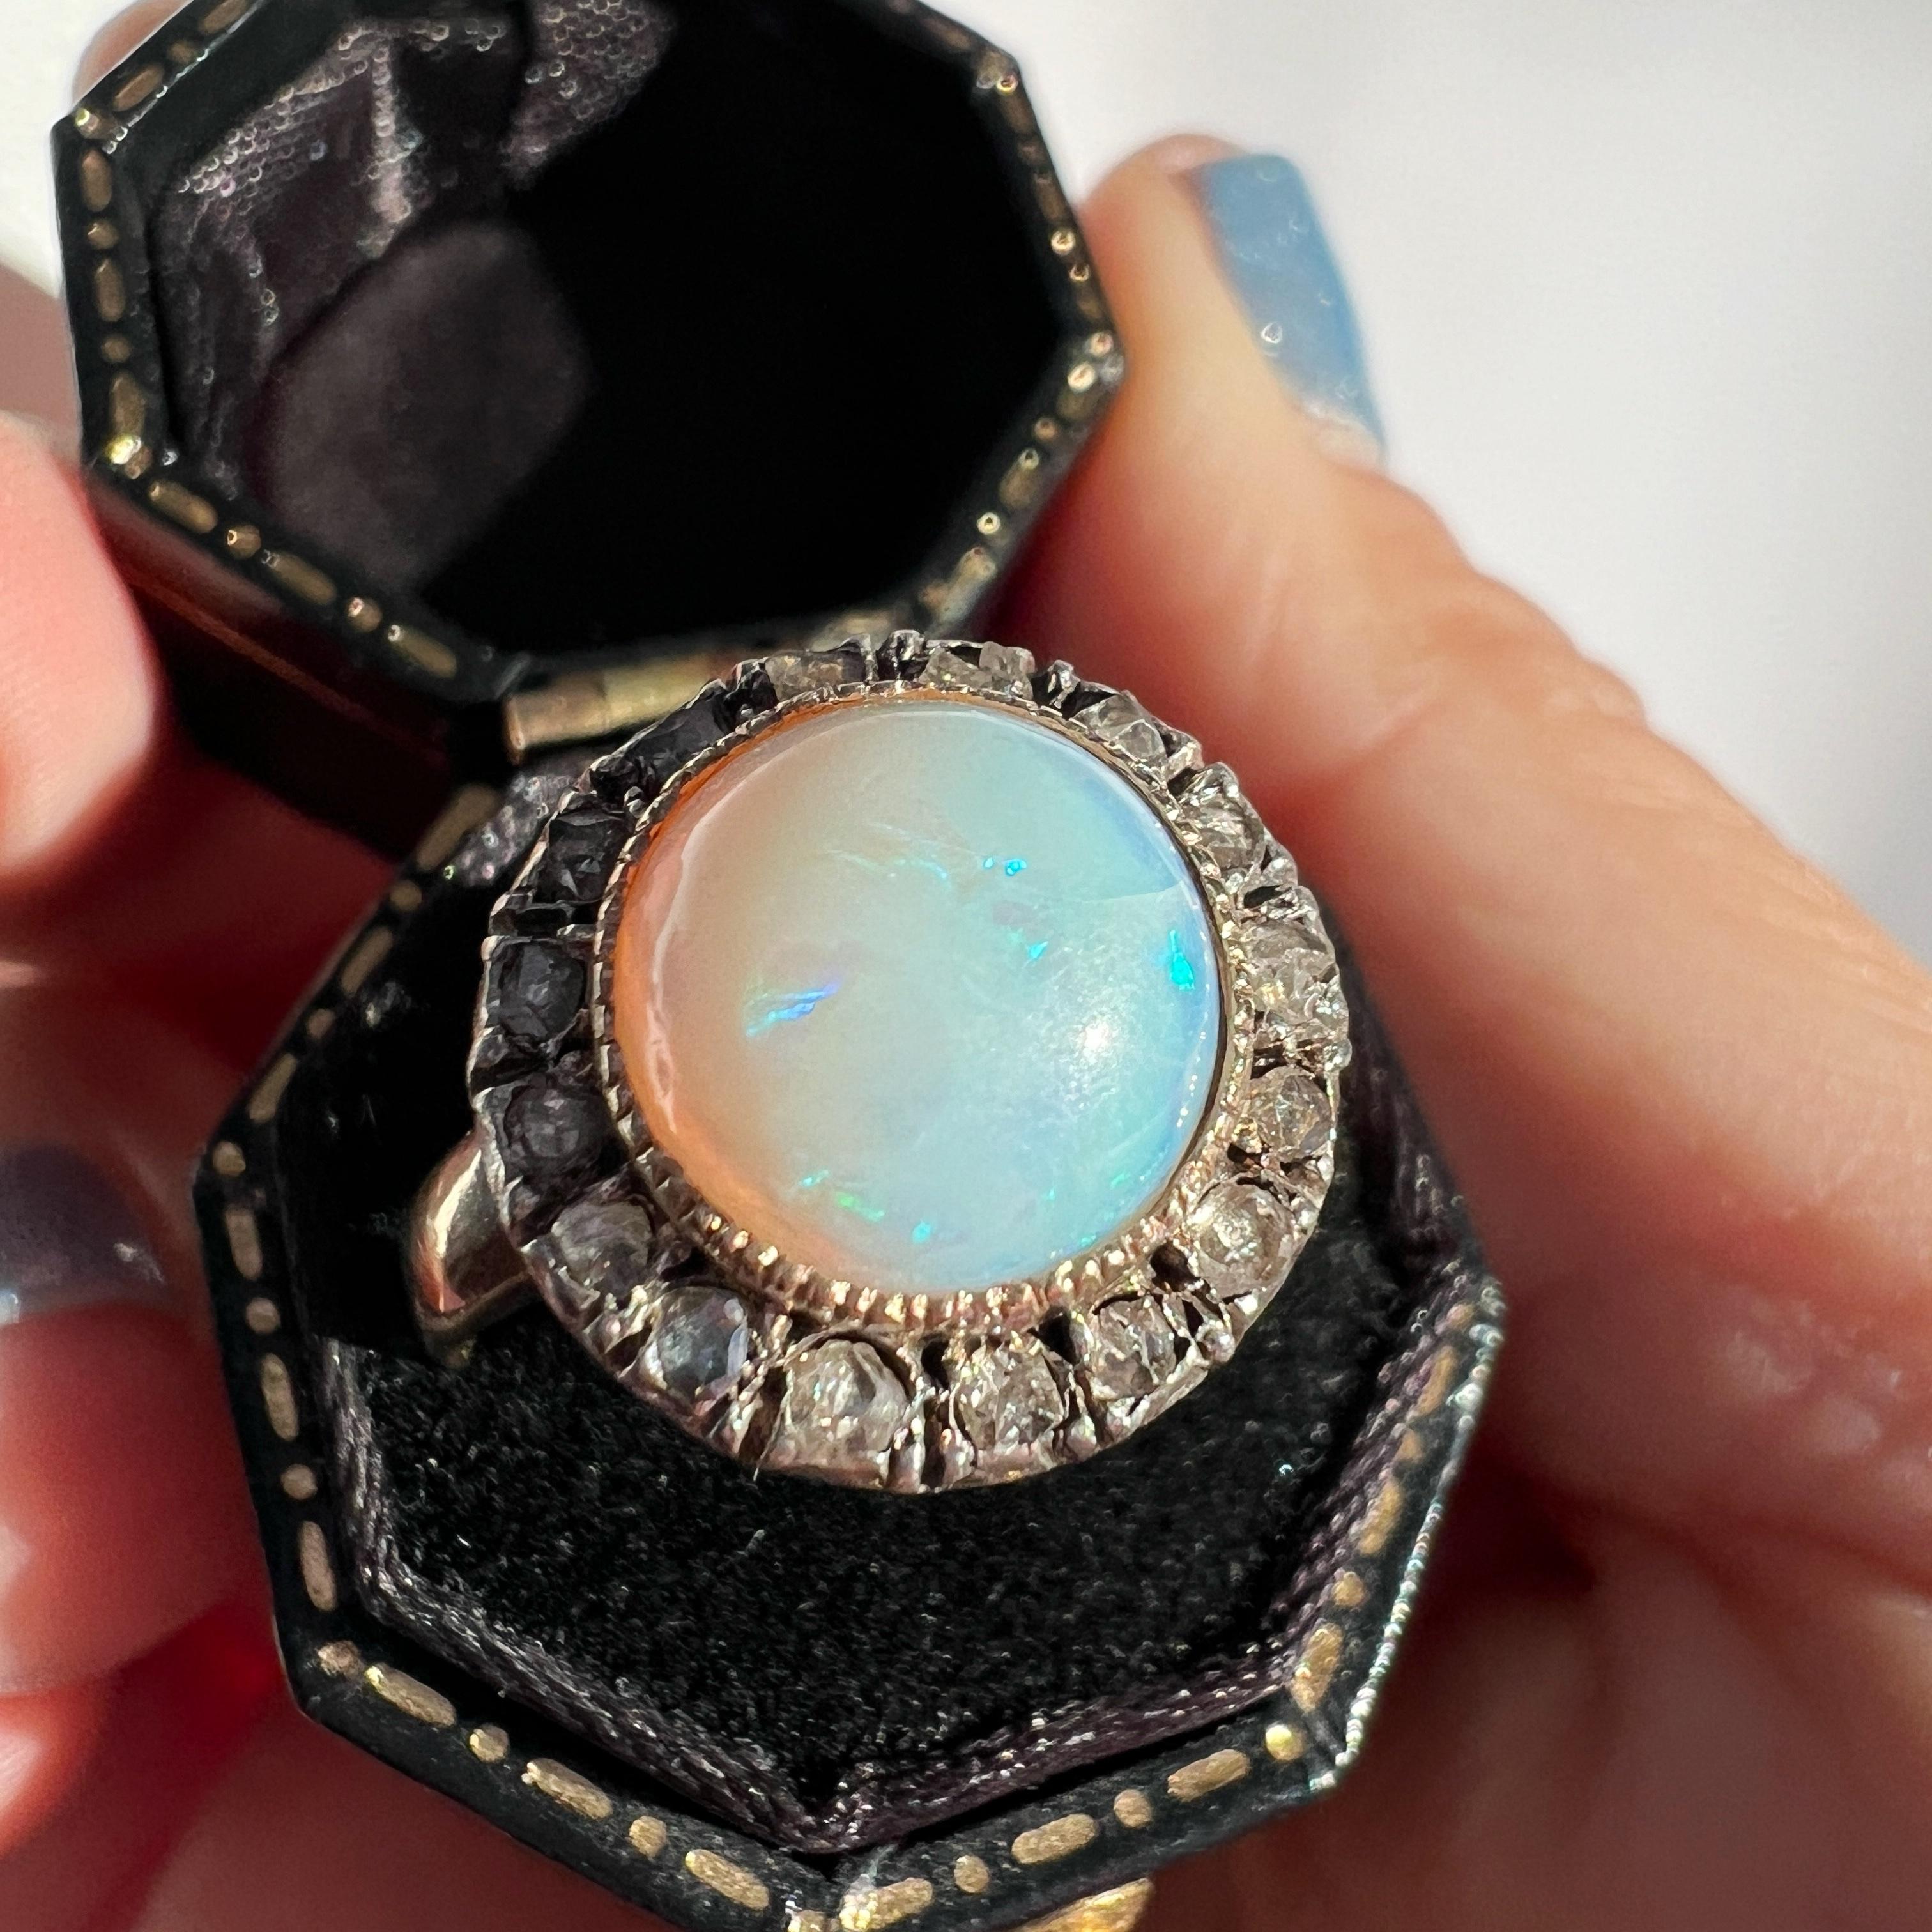 For sale an antique 18K gold ring made from the 19th century, the Victorian era. At its heart lies a captivating semi-transparent opal cabochon, measuring approximately 5mm in diameter. Encircling this magic gemstone is a delicate frame of 16